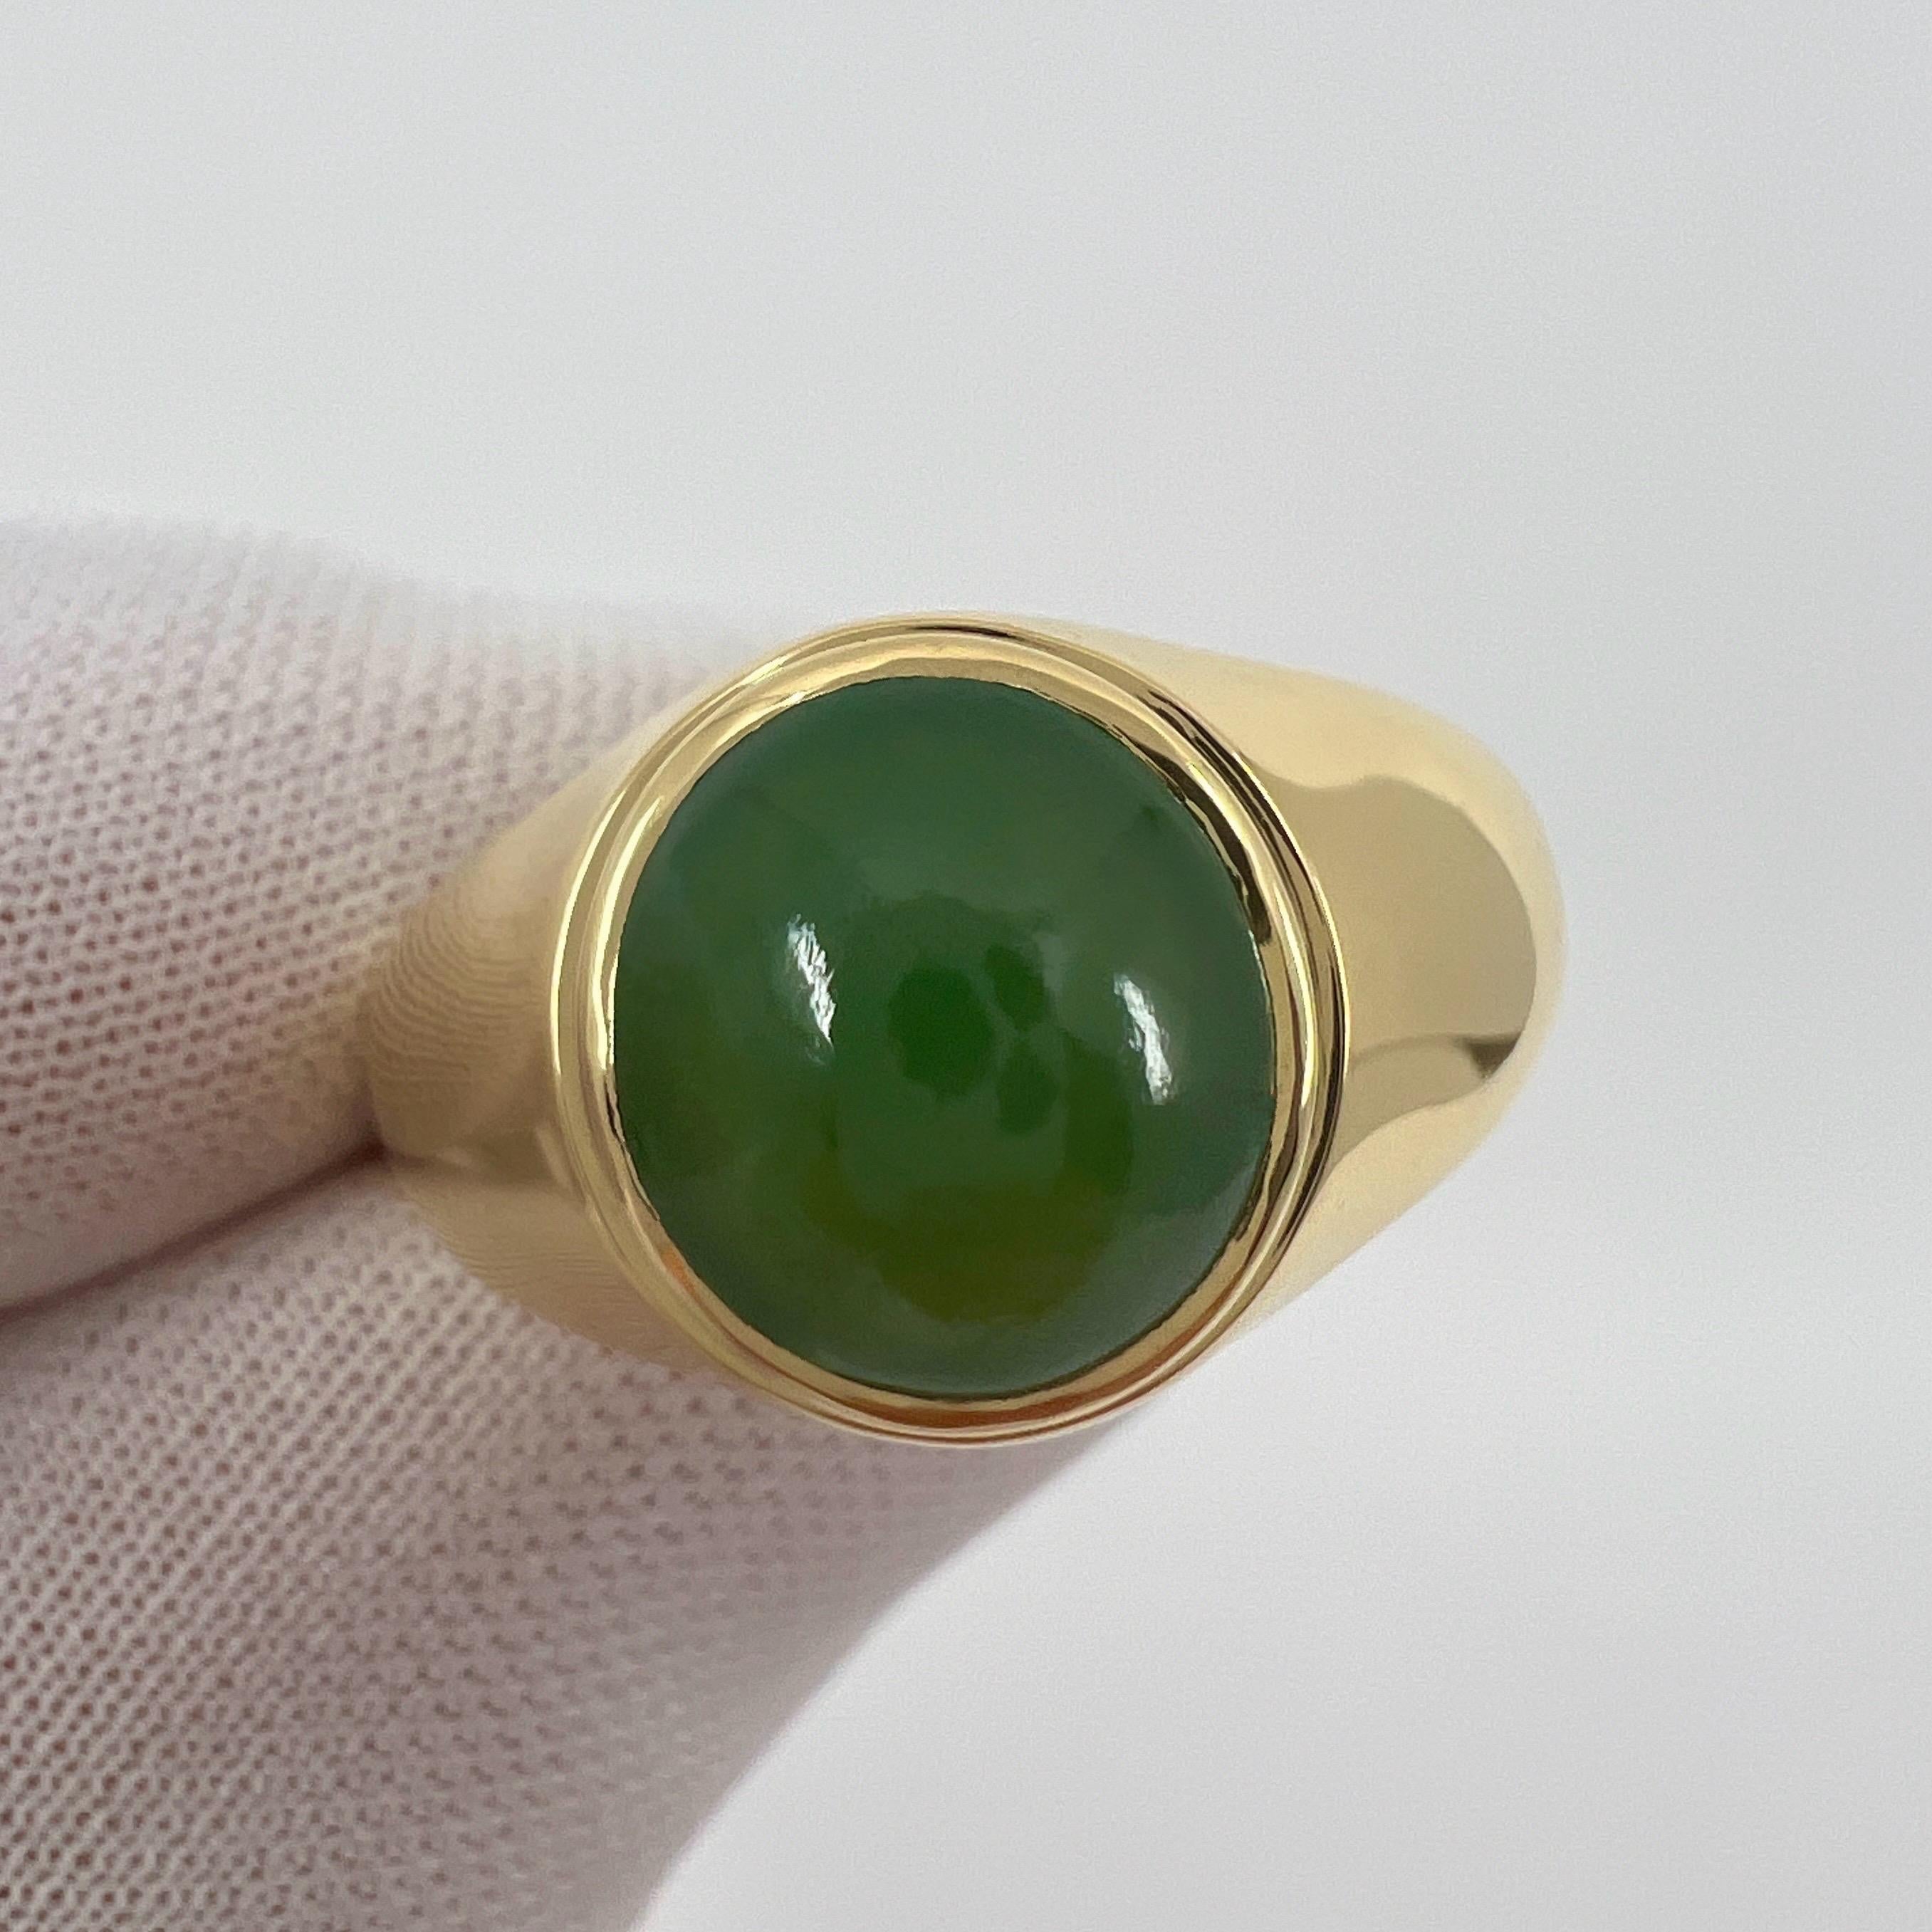 IGI Certified A-Grade Deep Green Jadeite 18k Yellow Gold Signet Ring.

A stunning 2.89 carat untreated deep green jadeite jade set in a fine 18k yellow gold rubover bezel signet ring.

This jade has an excellent oval cabochon cut showing the colour